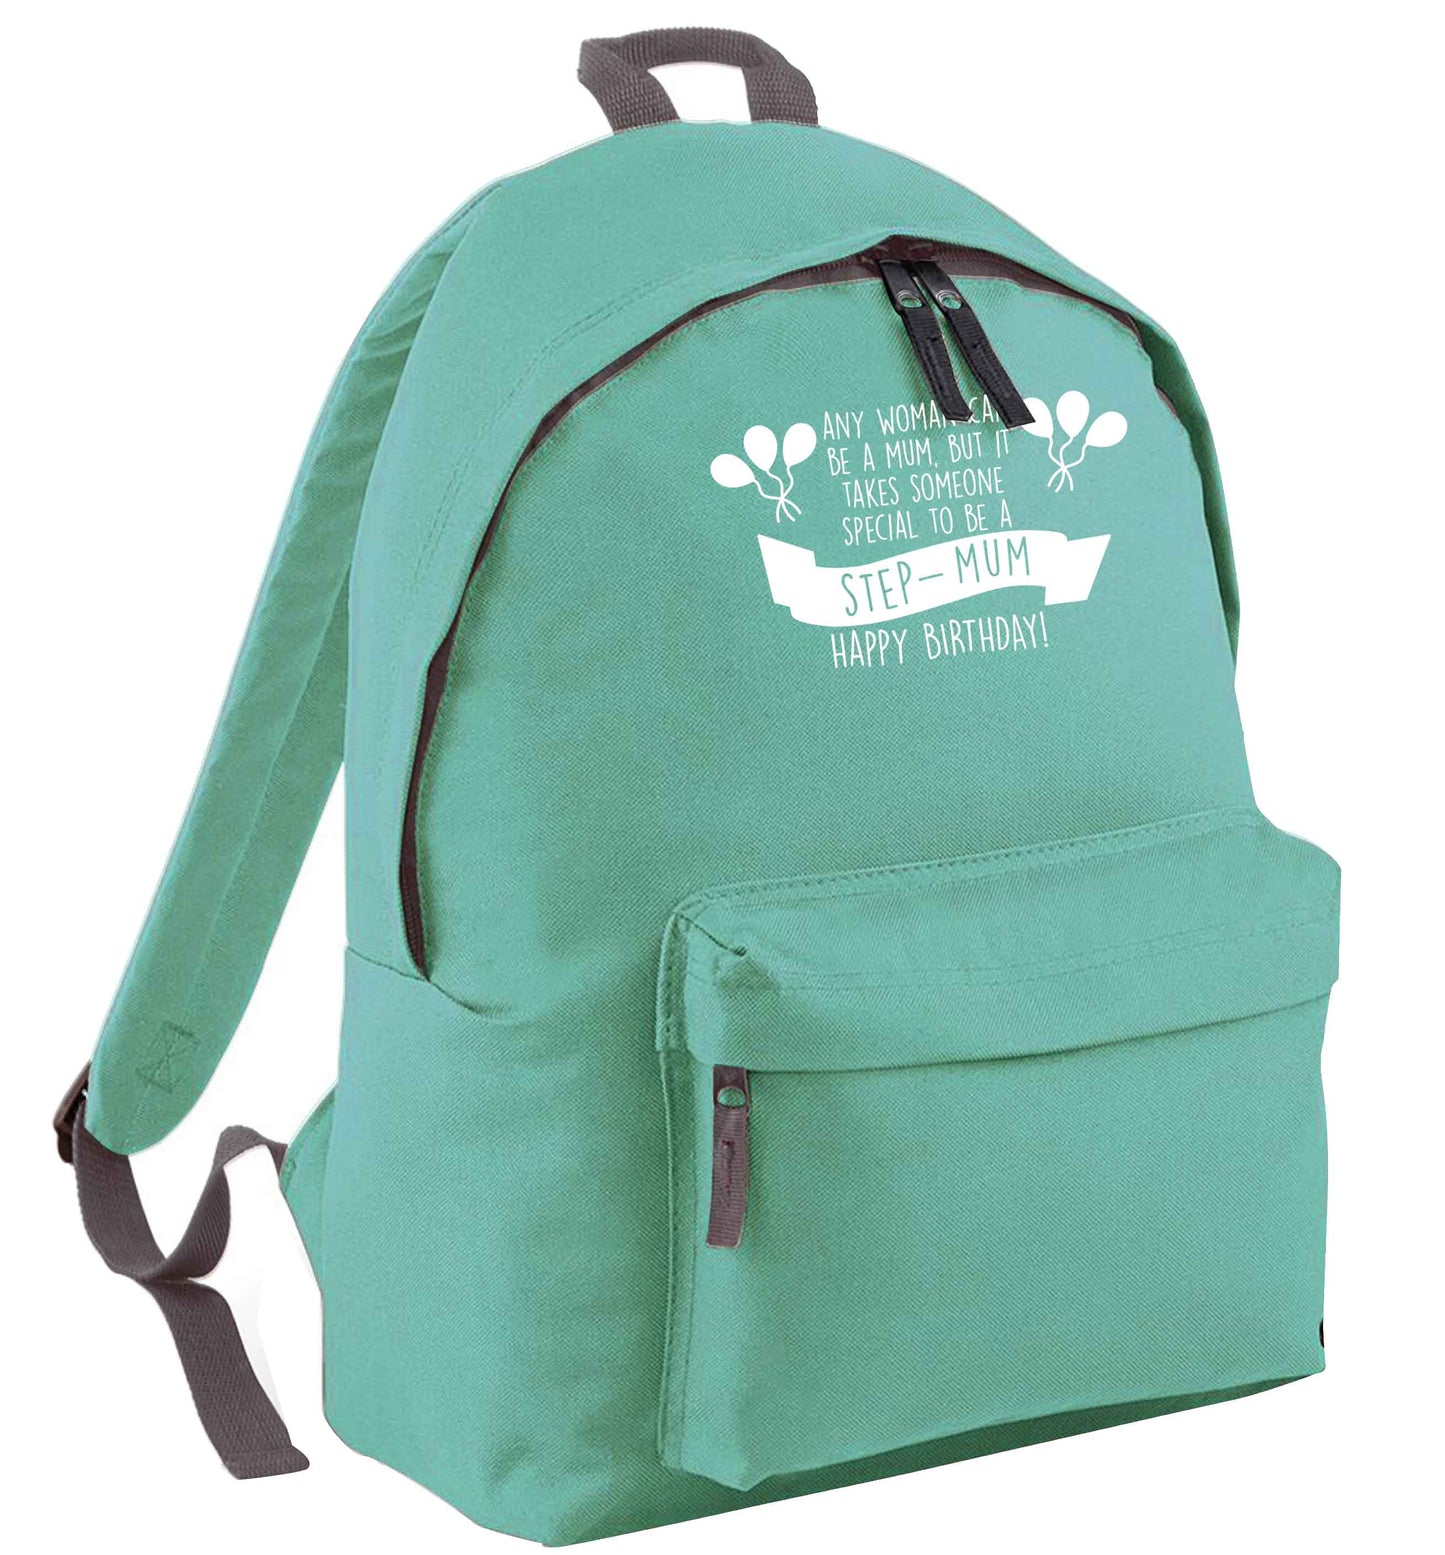 Takes someone special to be a step-mum, happy birthday! mint adults backpack